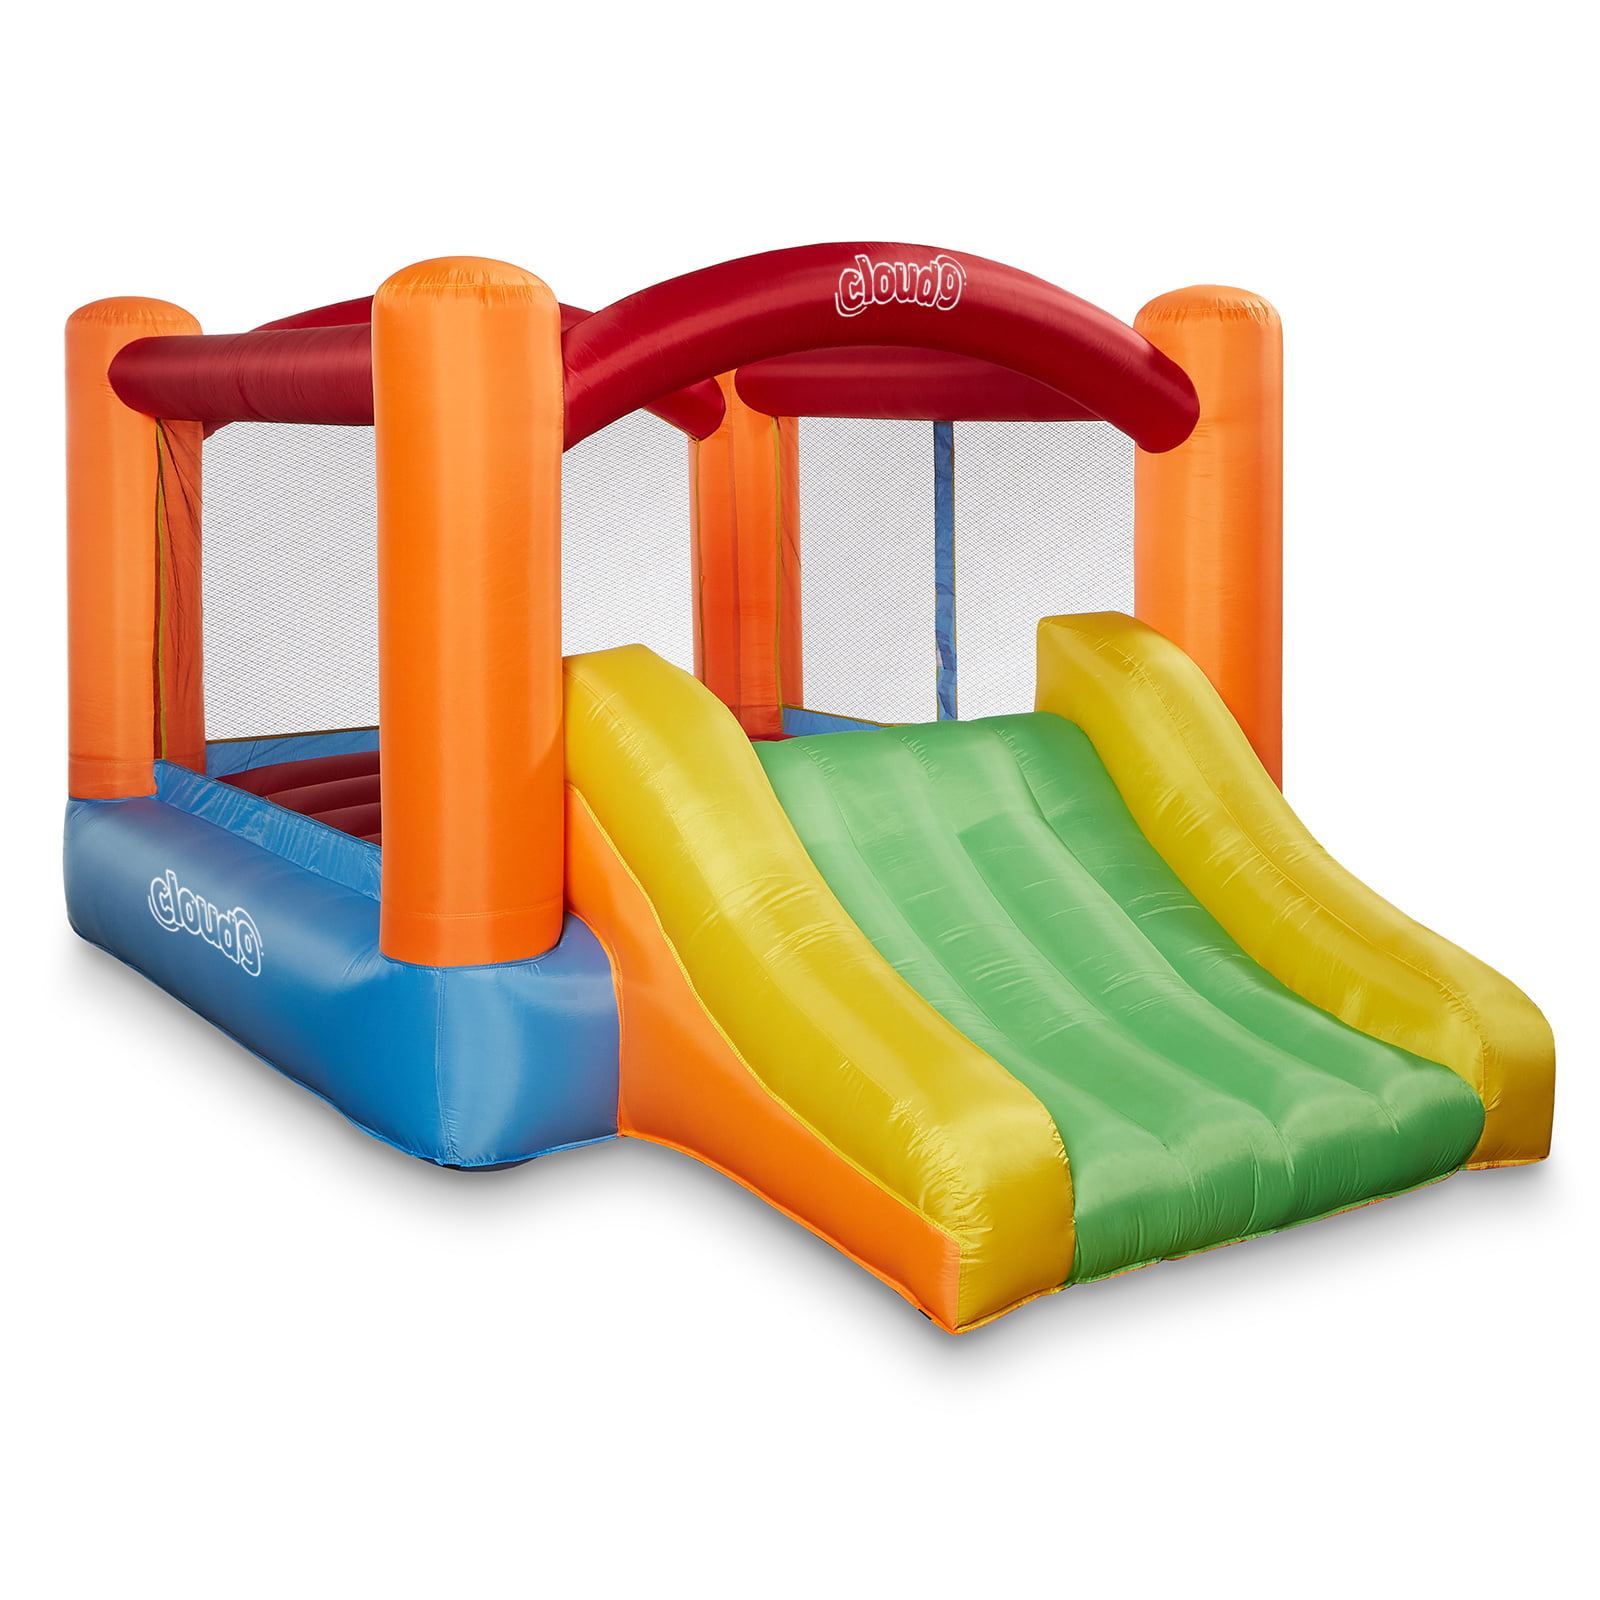 Cloud 9 Bounce House with Slide with Blower and Bag